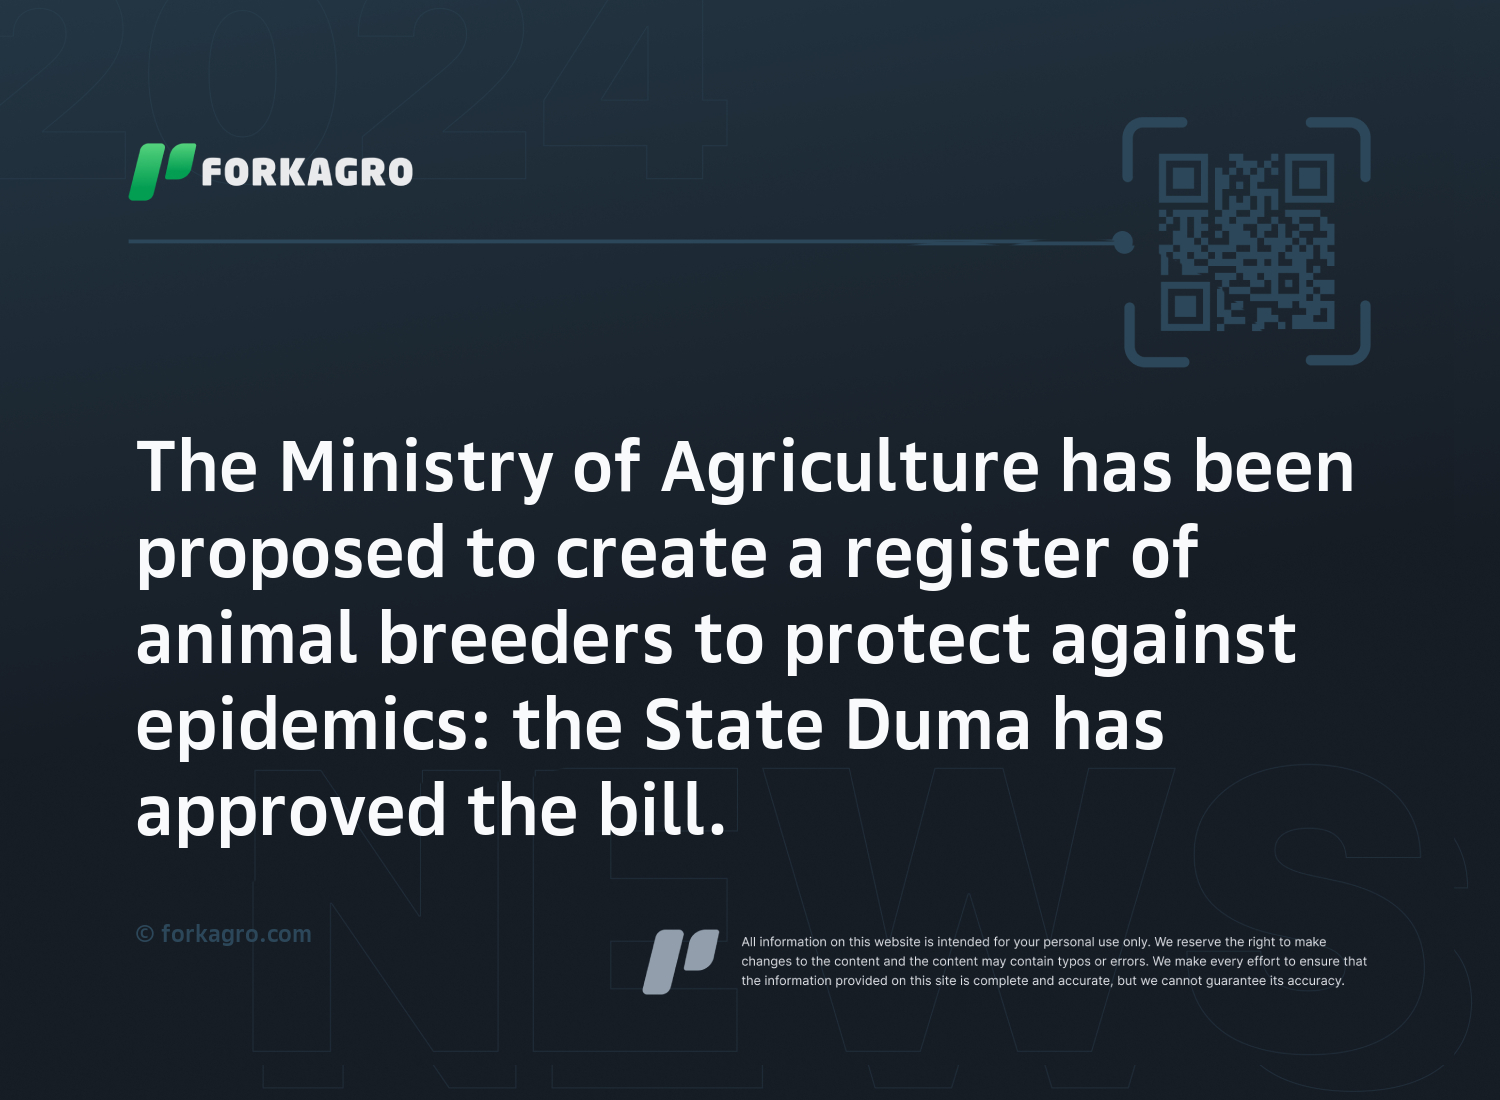 The Ministry of Agriculture has been proposed to create a register of animal breeders to protect against epidemics: the State Duma has approved the bill.